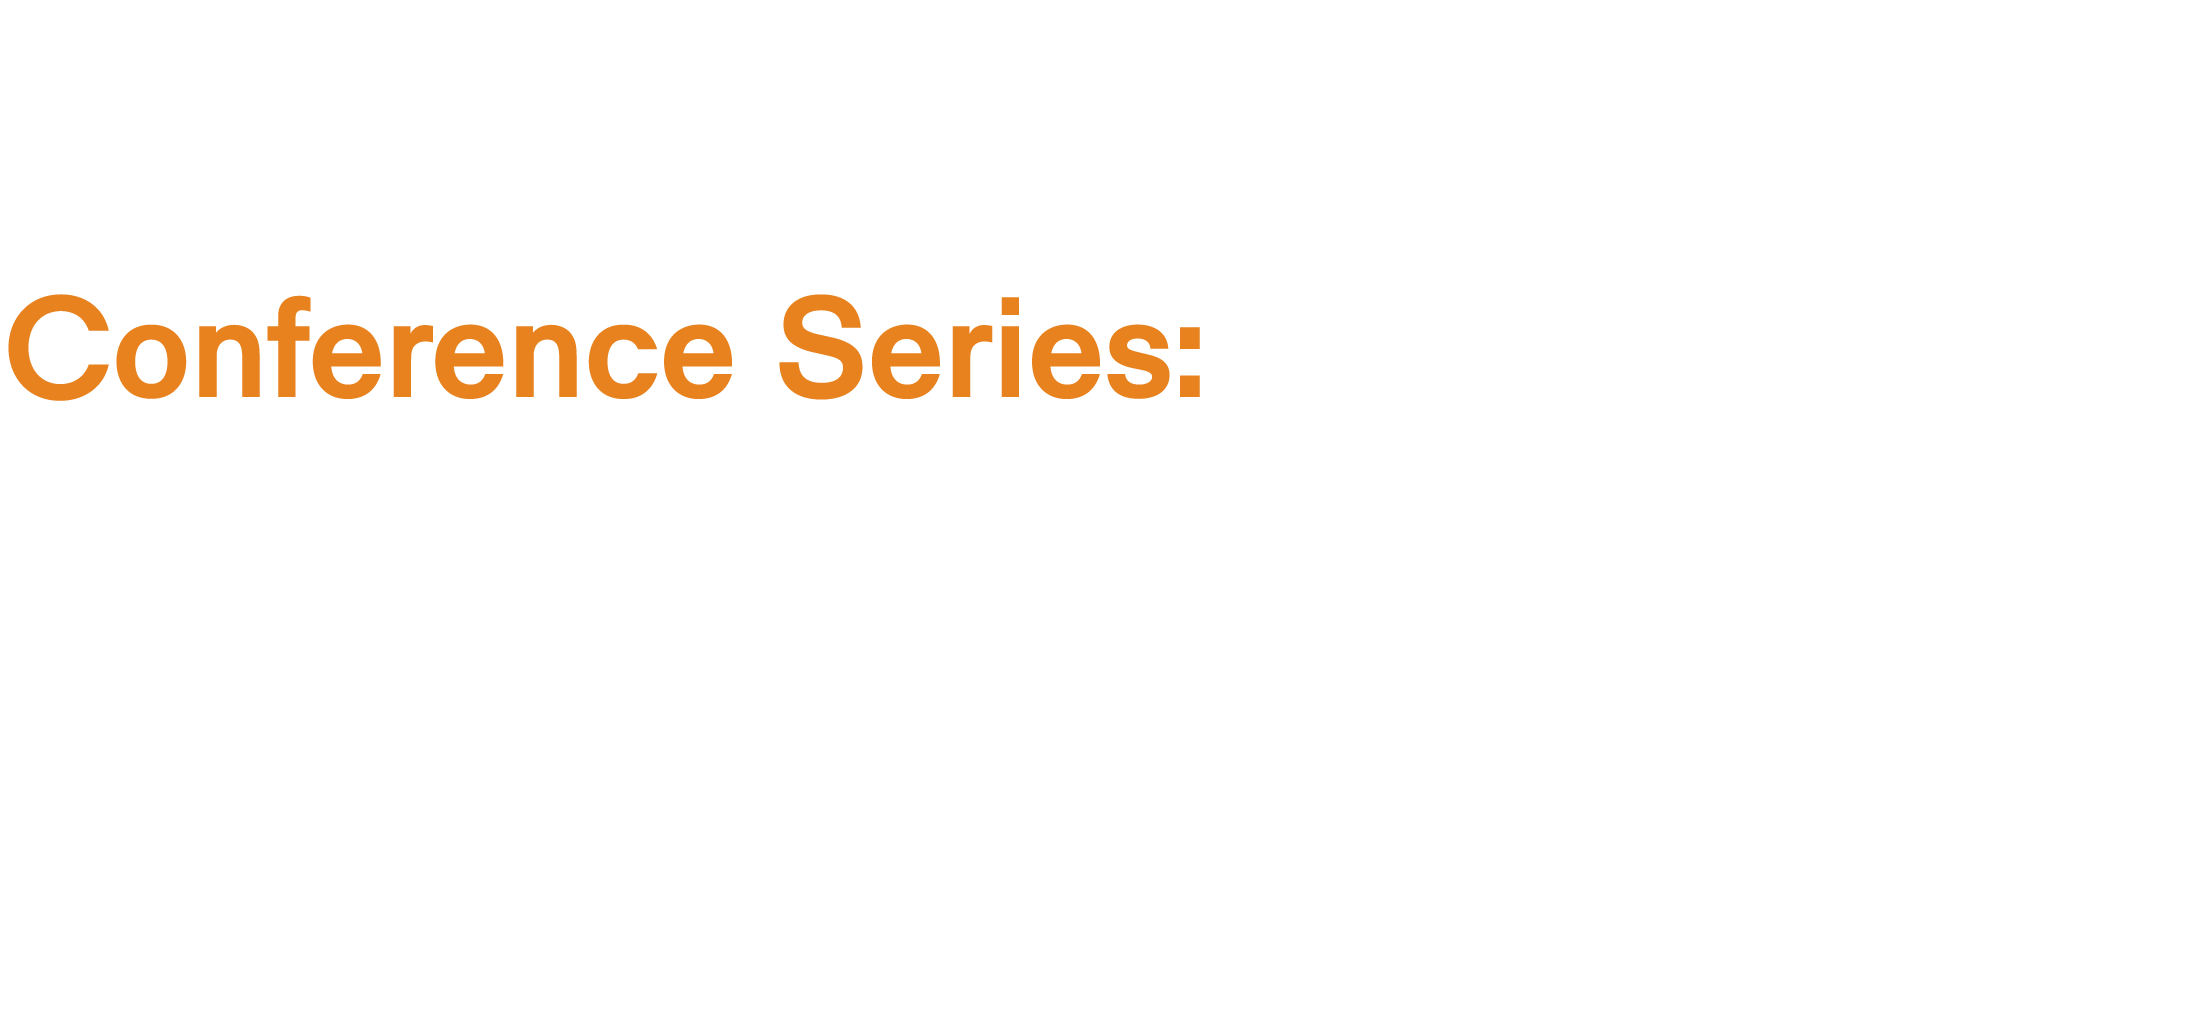 Conference Series: International Trade